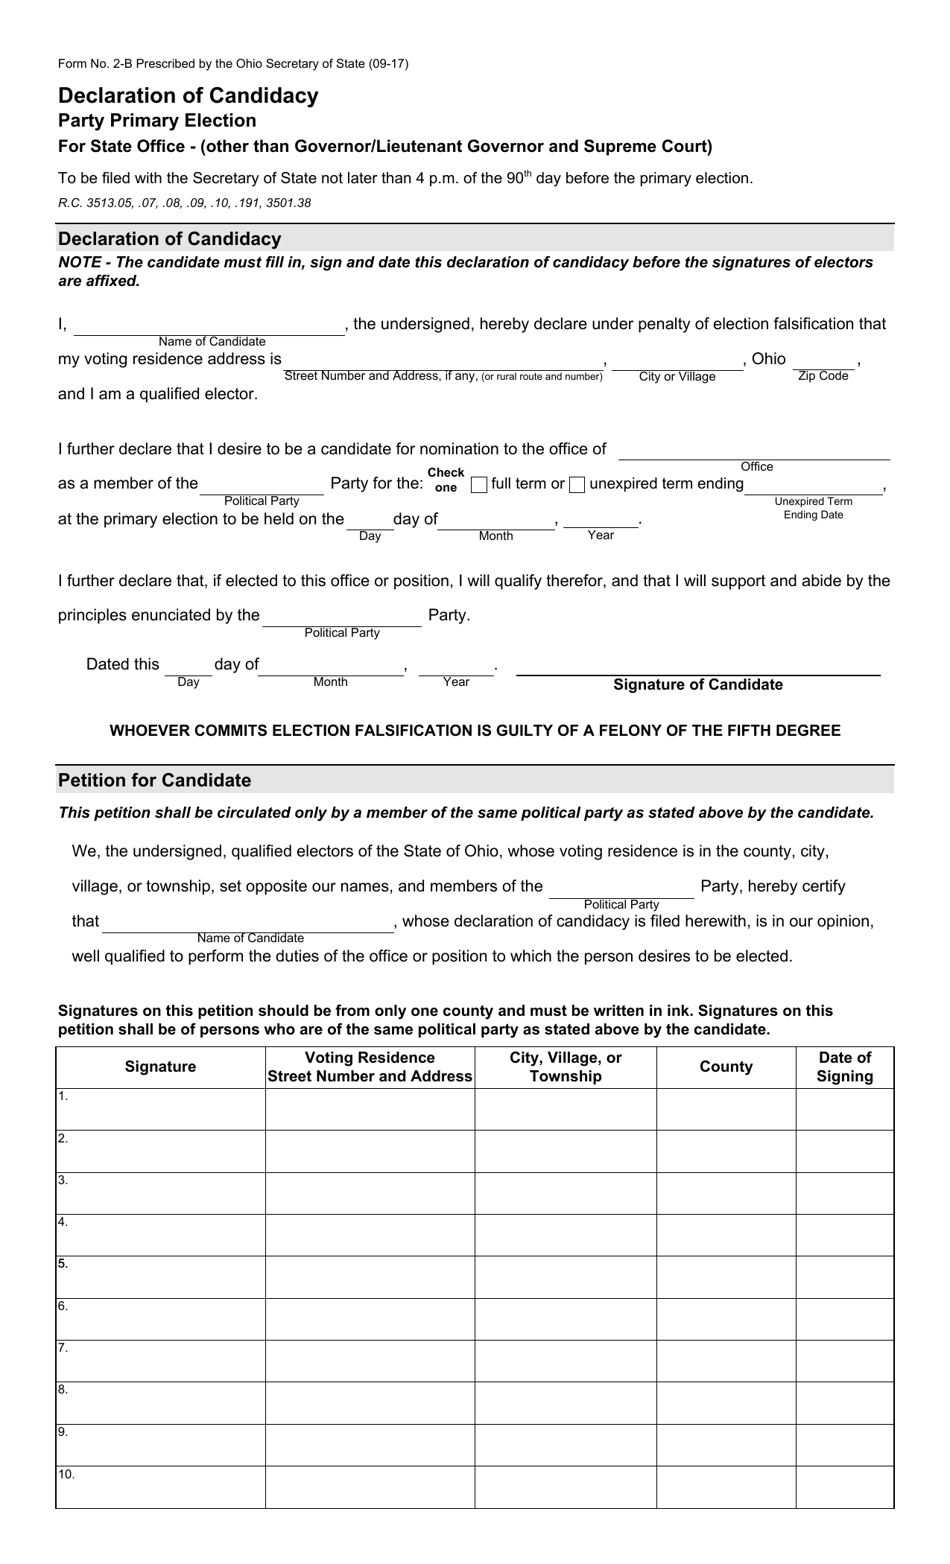 Form 2-B Declaration of Candidacy - Party Primary Election for State Office (Other Than Governor/Lieutenant Governor and Supreme Court) - Ohio, Page 1